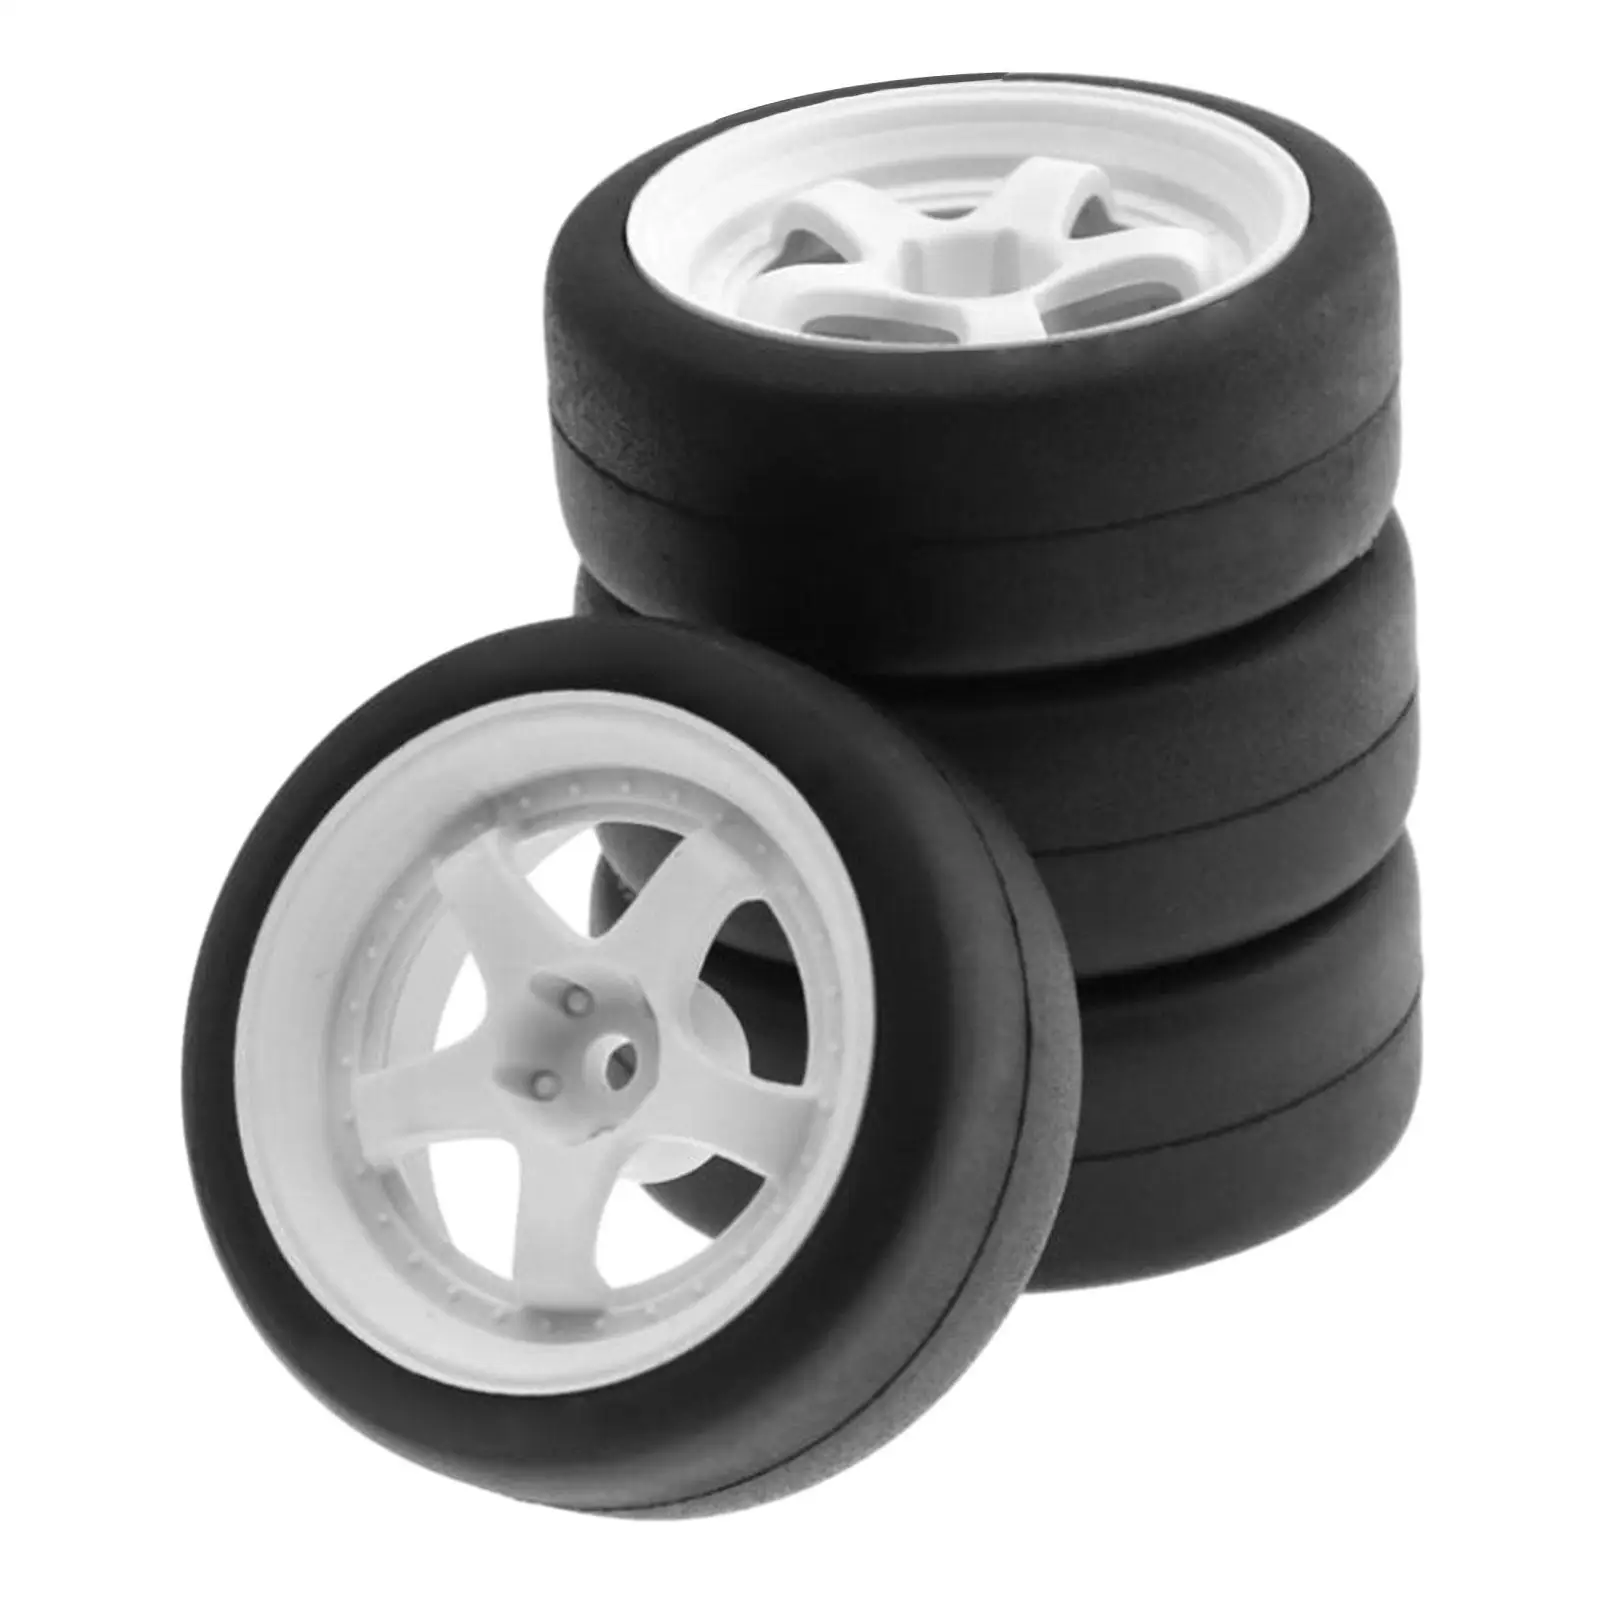 4Pcs Racing Car Tires Parts Replacement Replacements 1/10 Accessories RC Vehicle Upgrade Parts Spare Parts Hex 12mm RC Car Tires